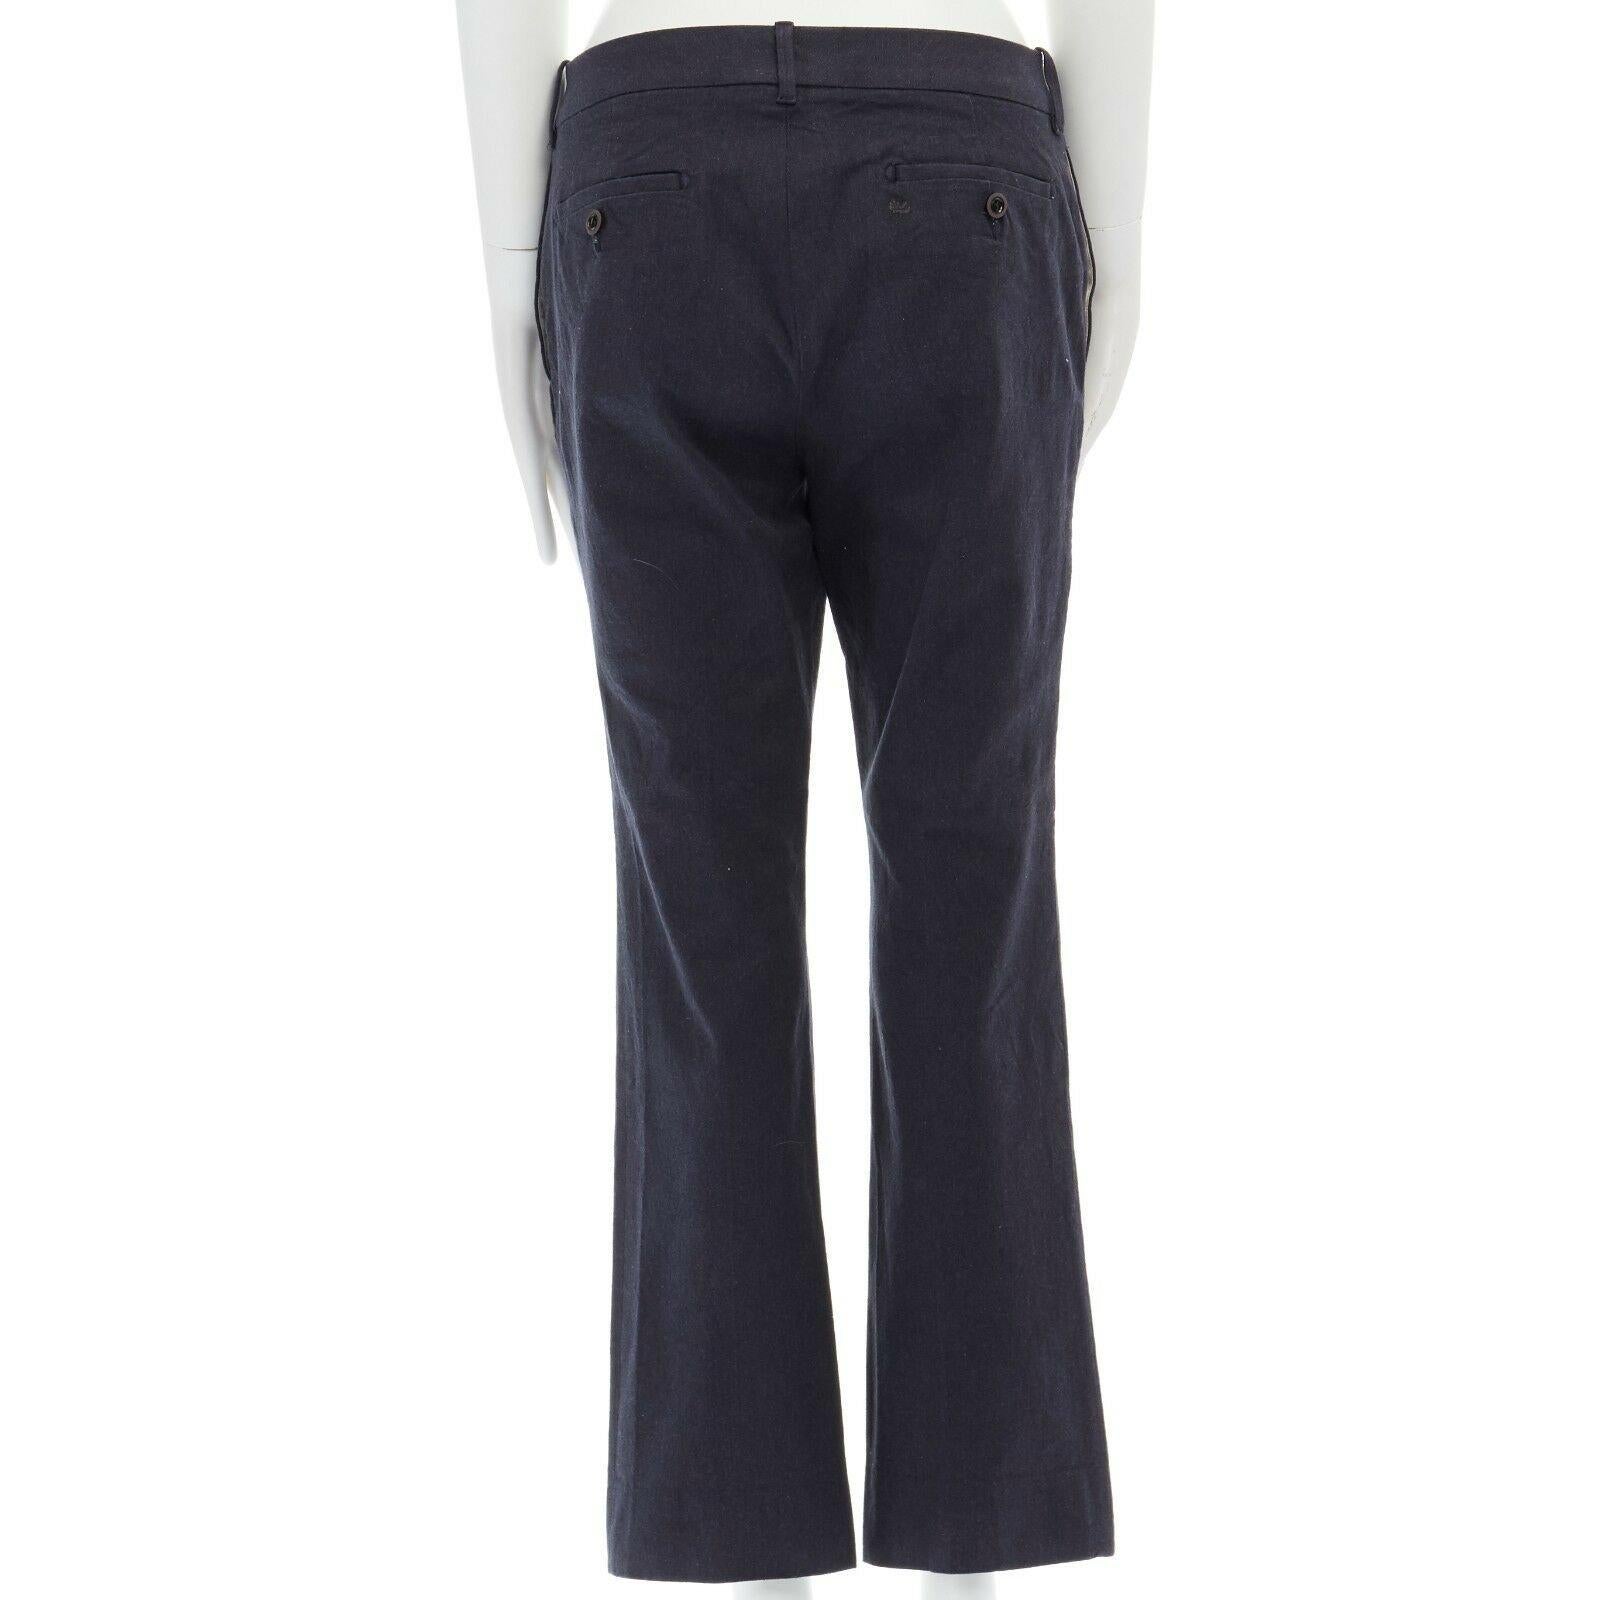 45R 45RPM dark grey stiff cotton blend slim fit pants JP2 
Reference: SANG/A00026 
Brand: 45R 
Material: Cotton 
Color: Grey 
Pattern: Solid 
Extra Detail: Stiff cotton. Dark grey. Belt loop detail. Concealed hook bar fly closure. Dual side pockets.